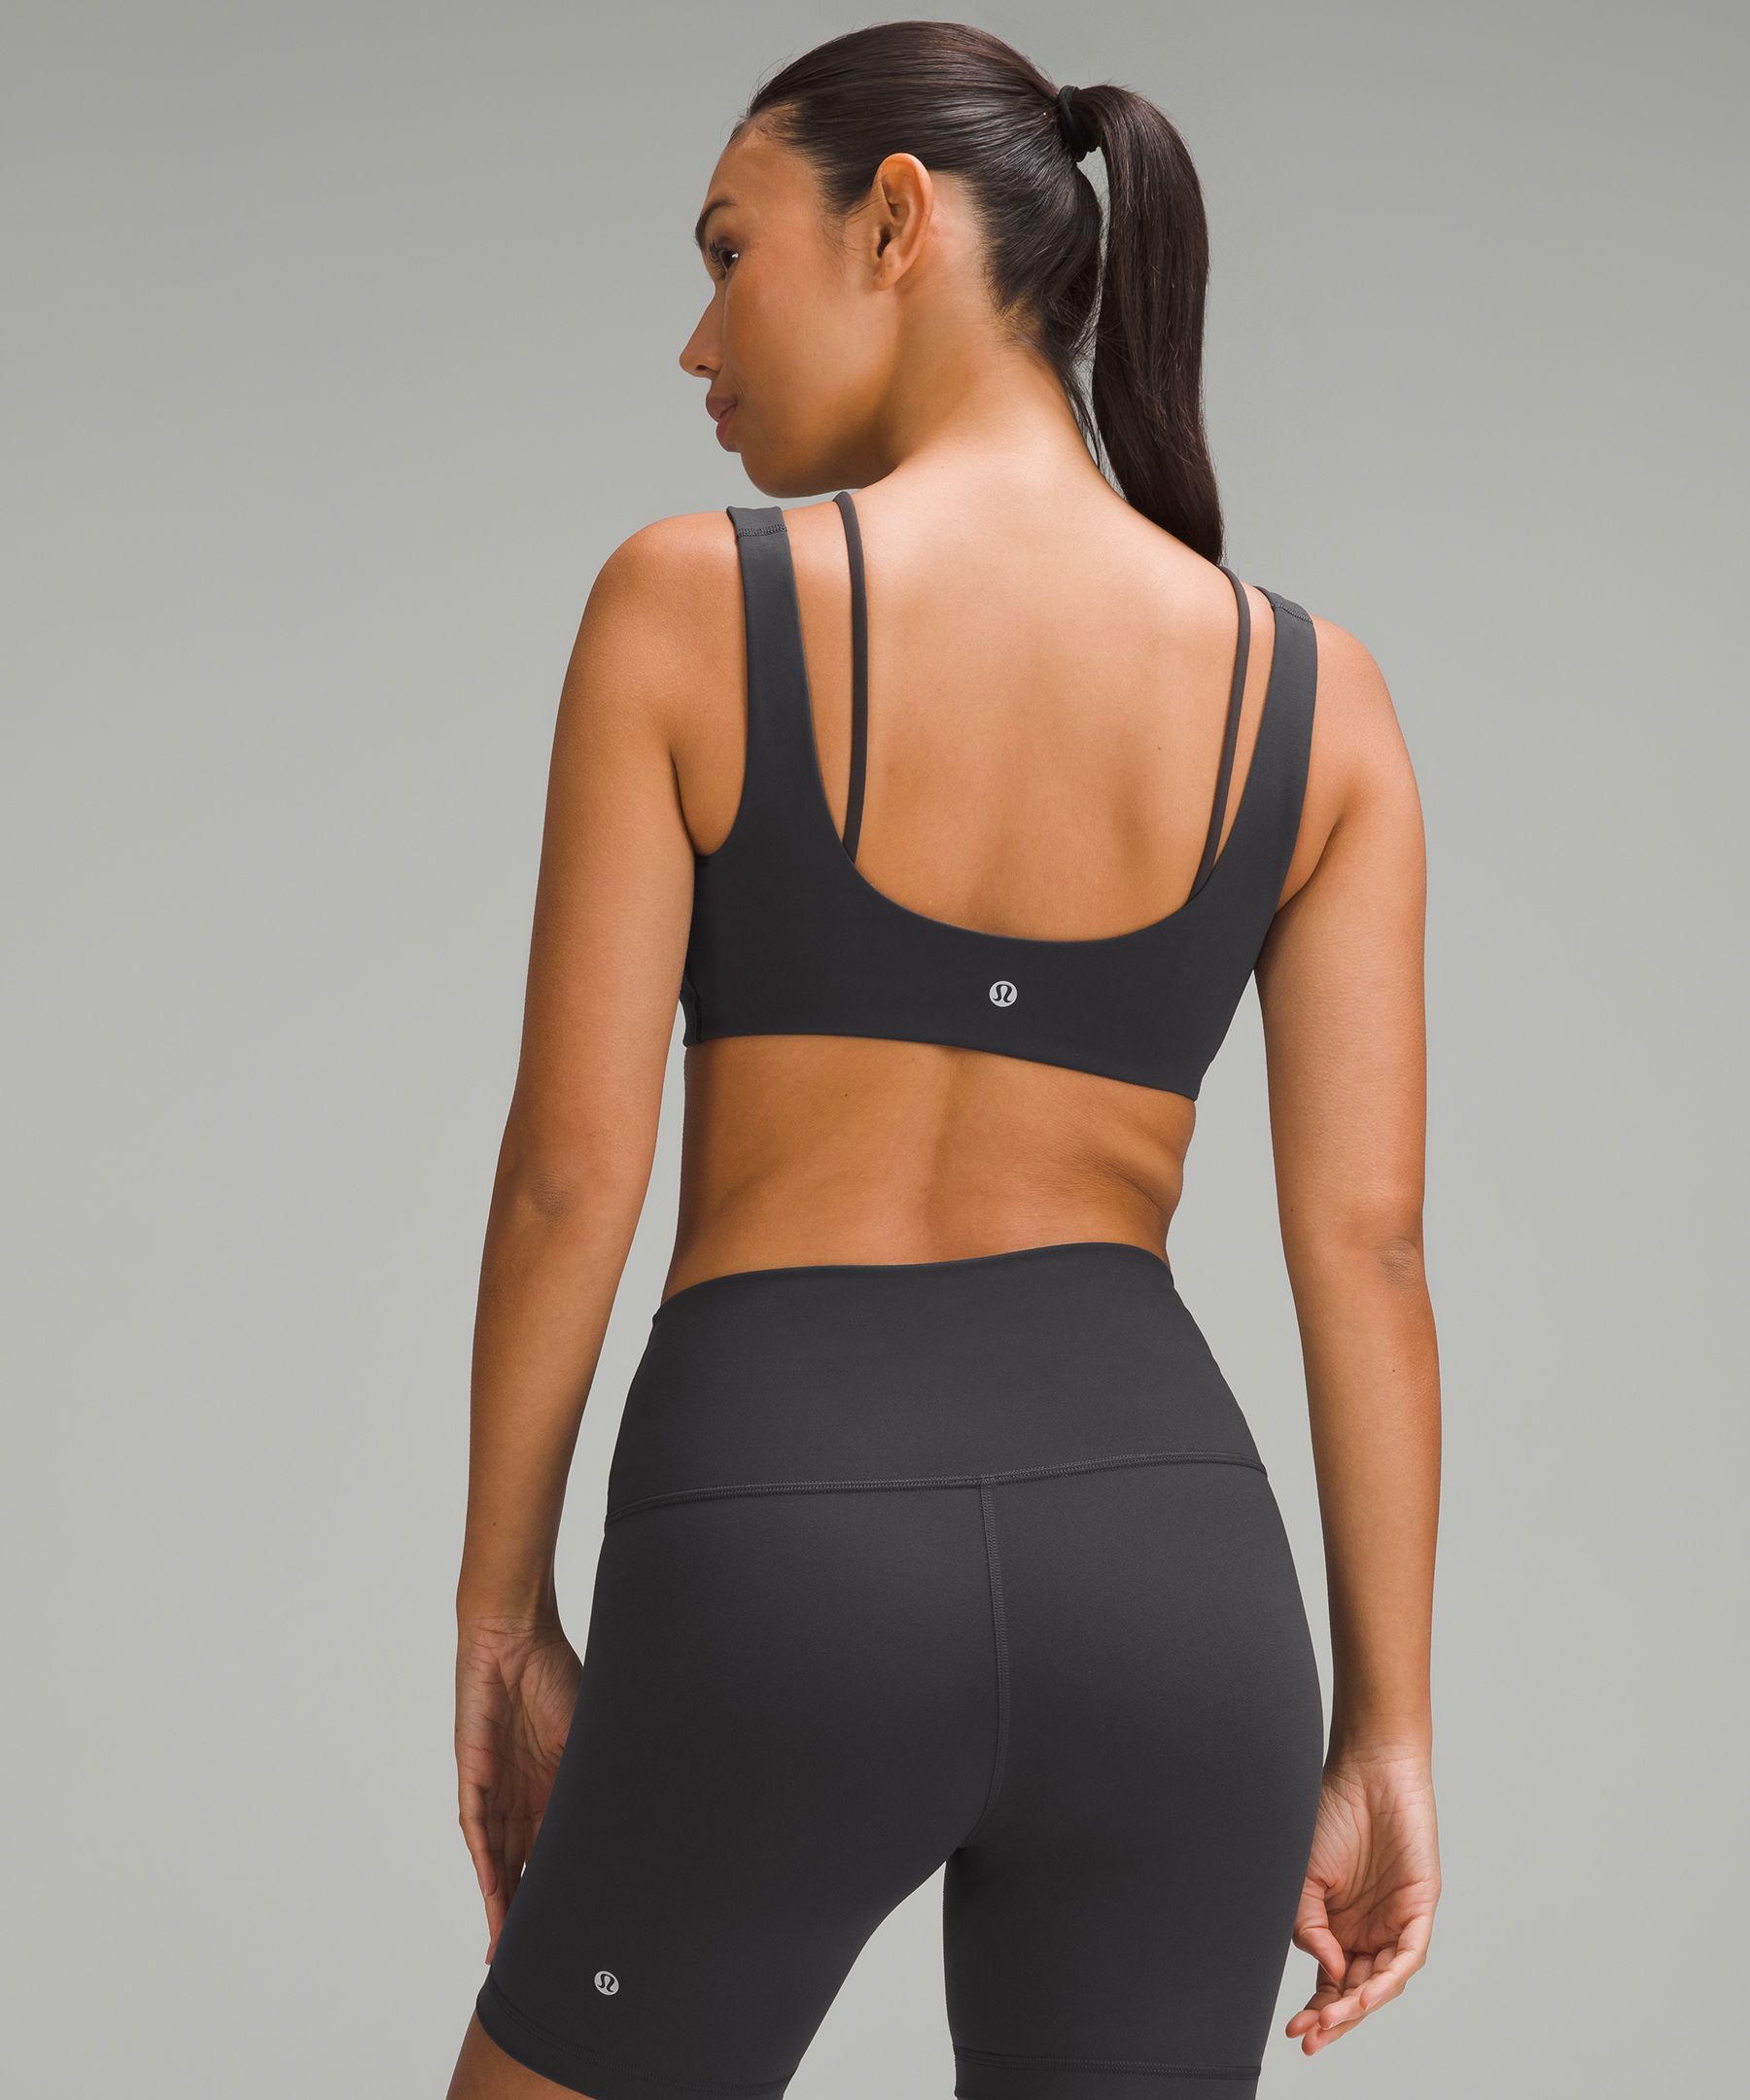 Lulu Fr-sp front and back yoga bra with anti glare and shockproof